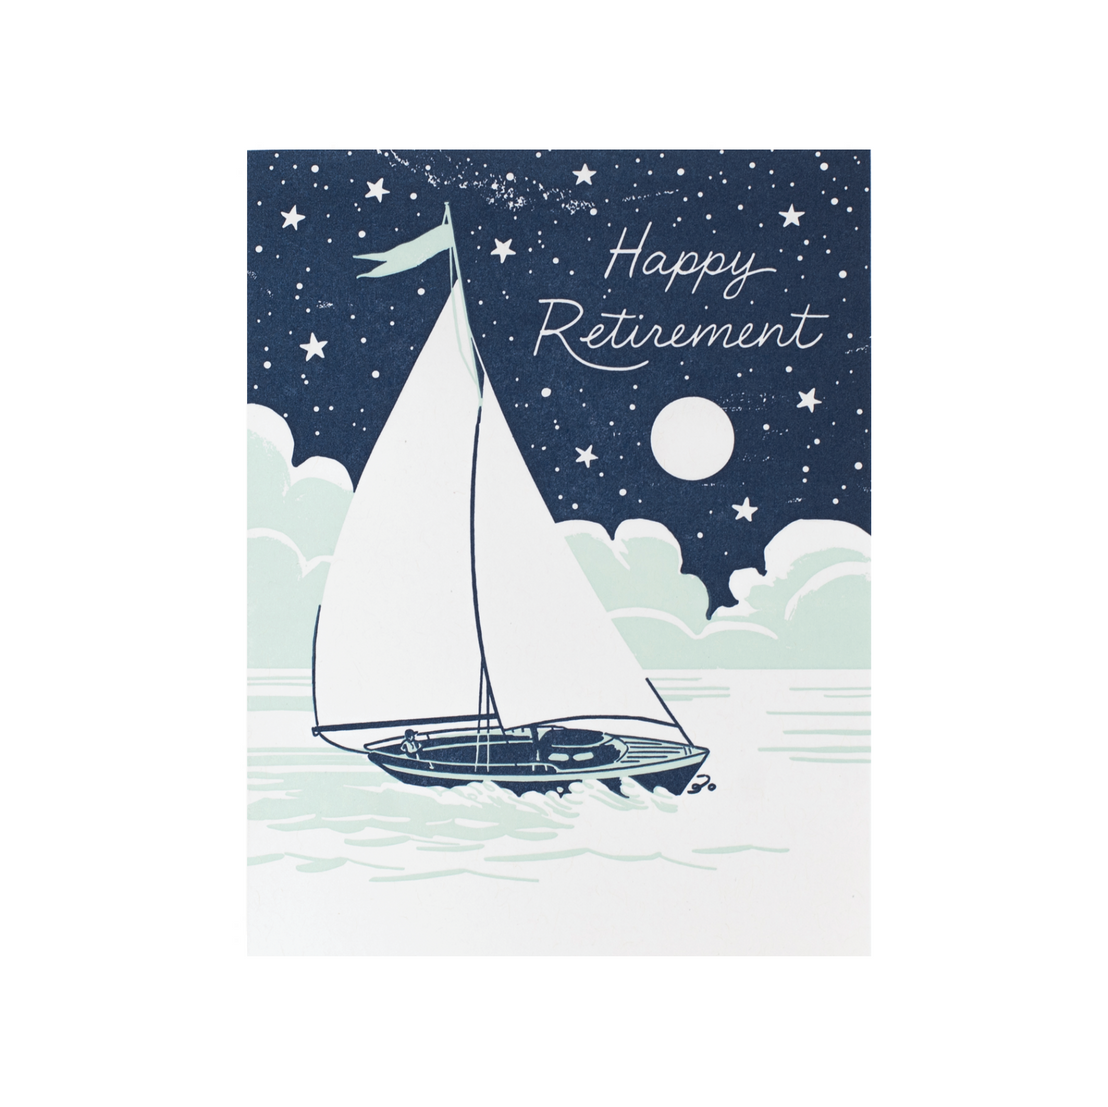 Nighttime Sailboat Retirement, Smudge Ink